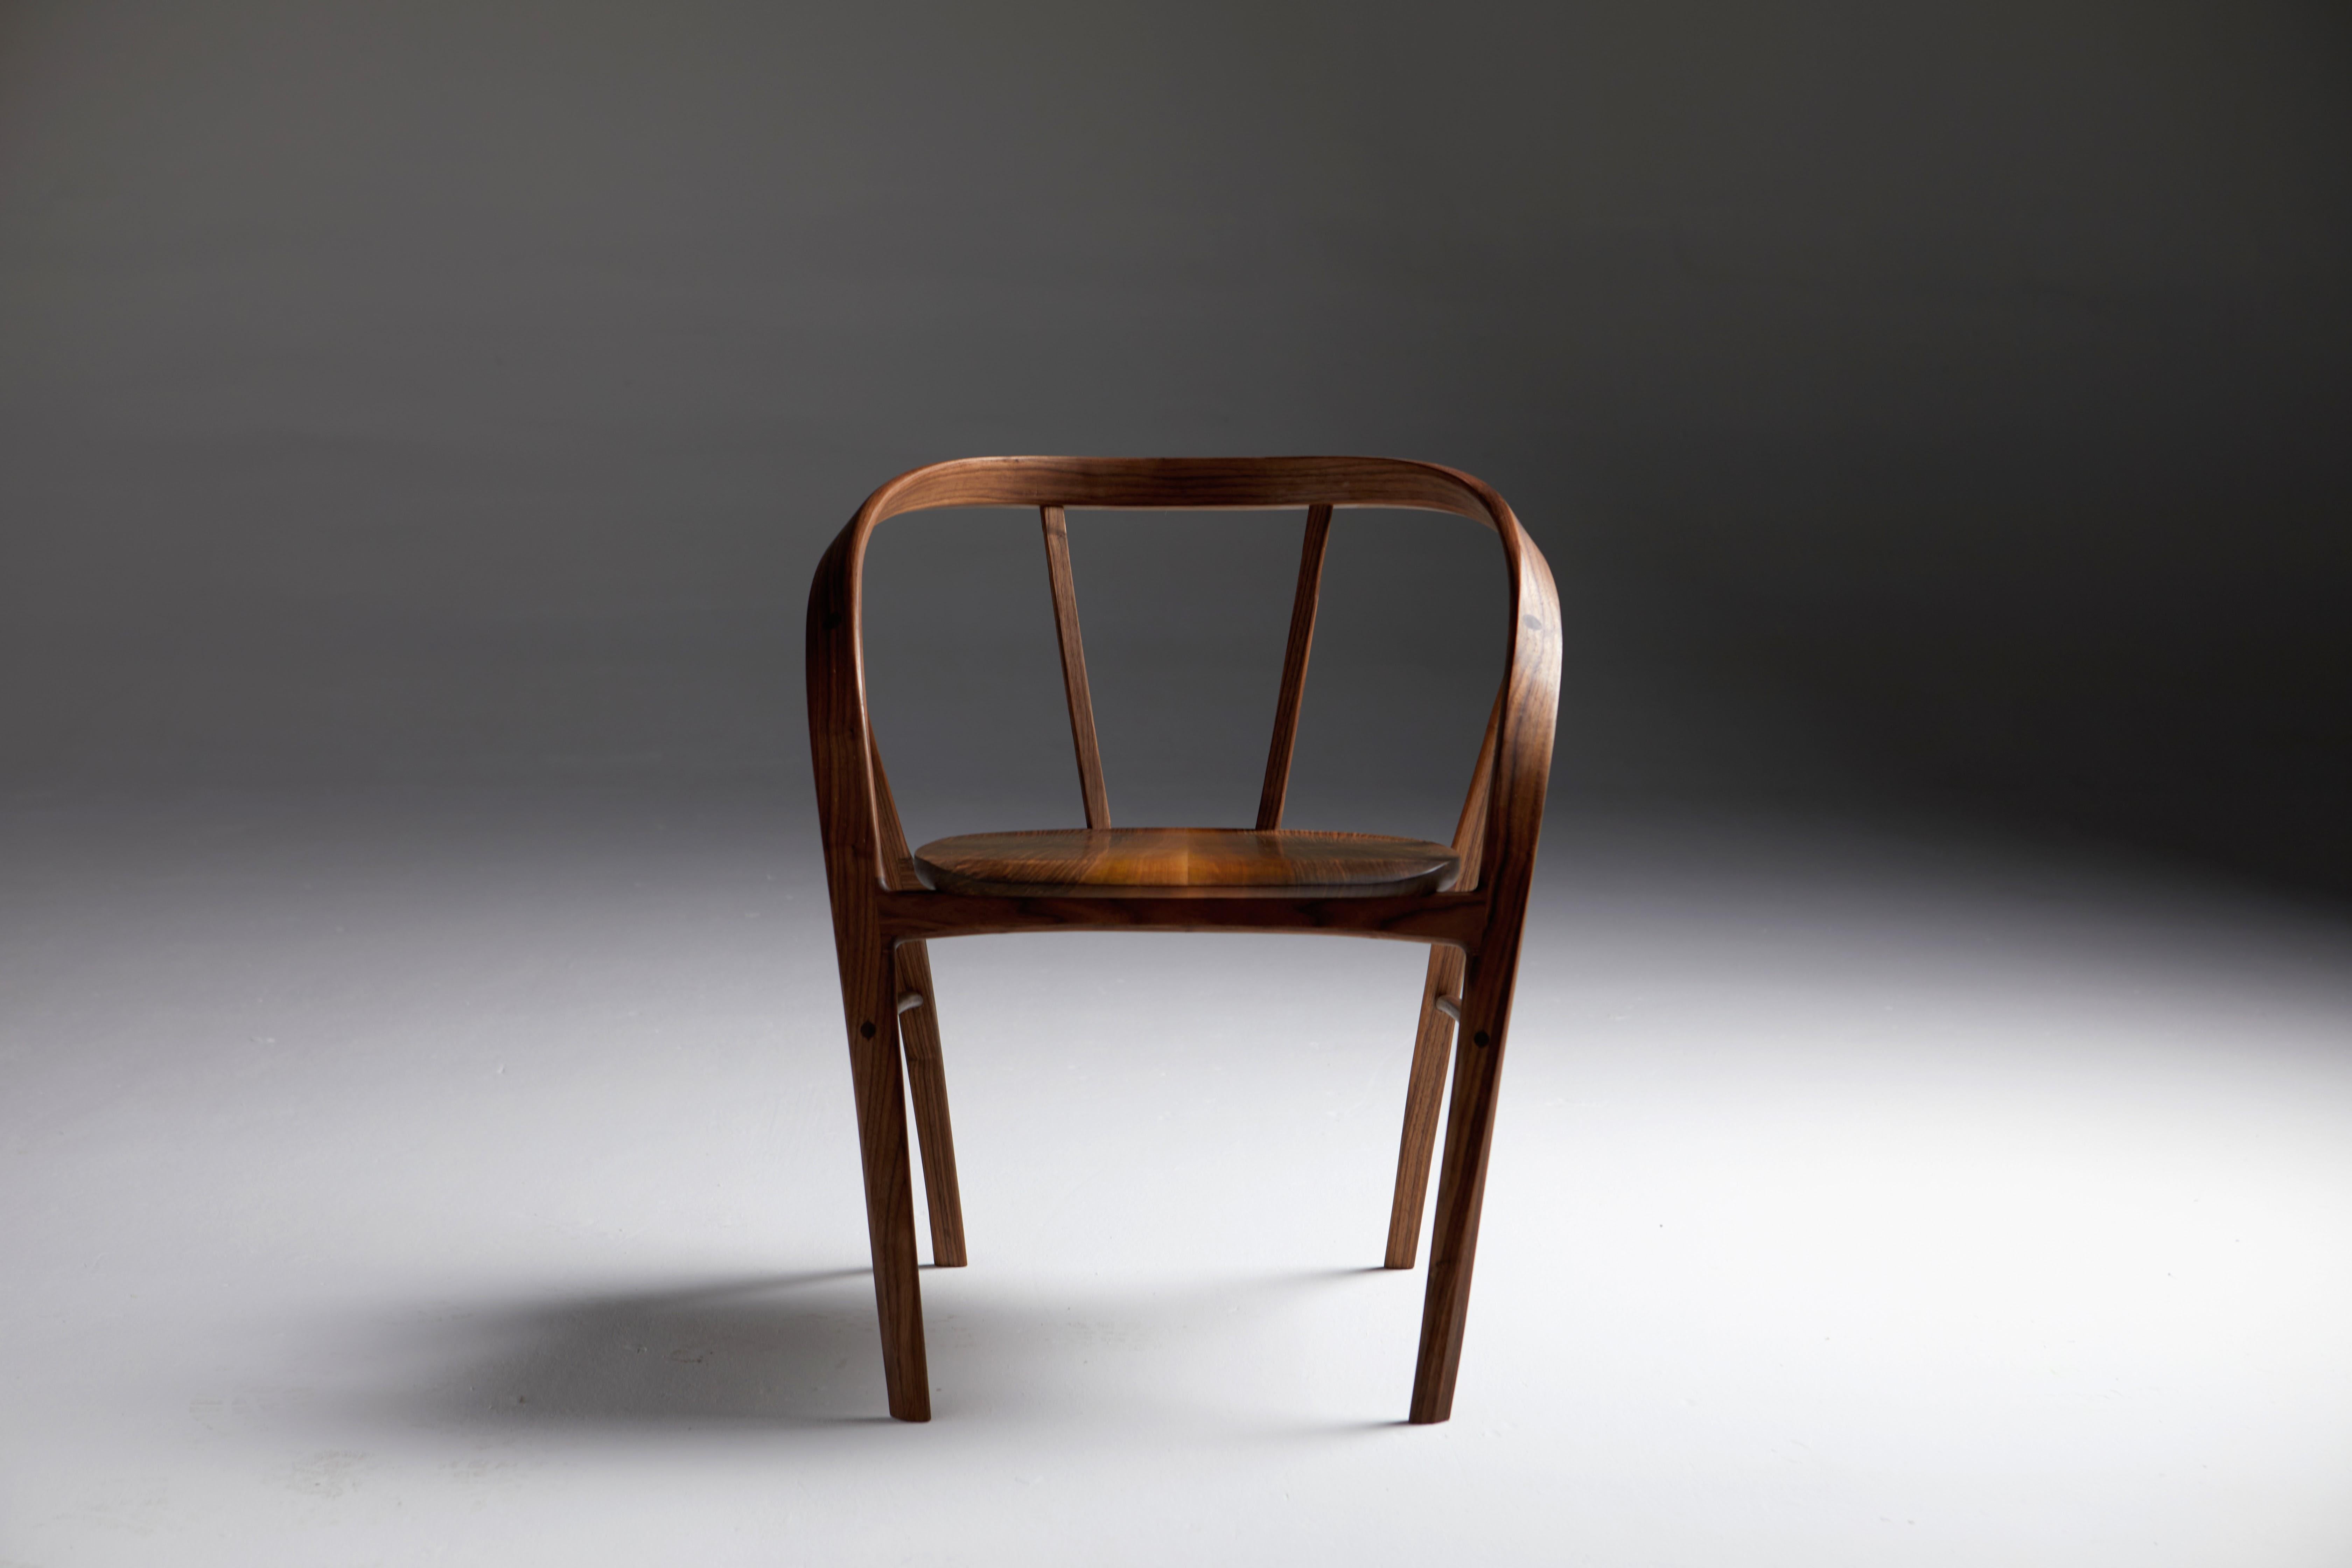 The Carol chair is a new design just completed in autumn 2021. 
The chair is handmade in bent walnut with a seat of English walnut. 
